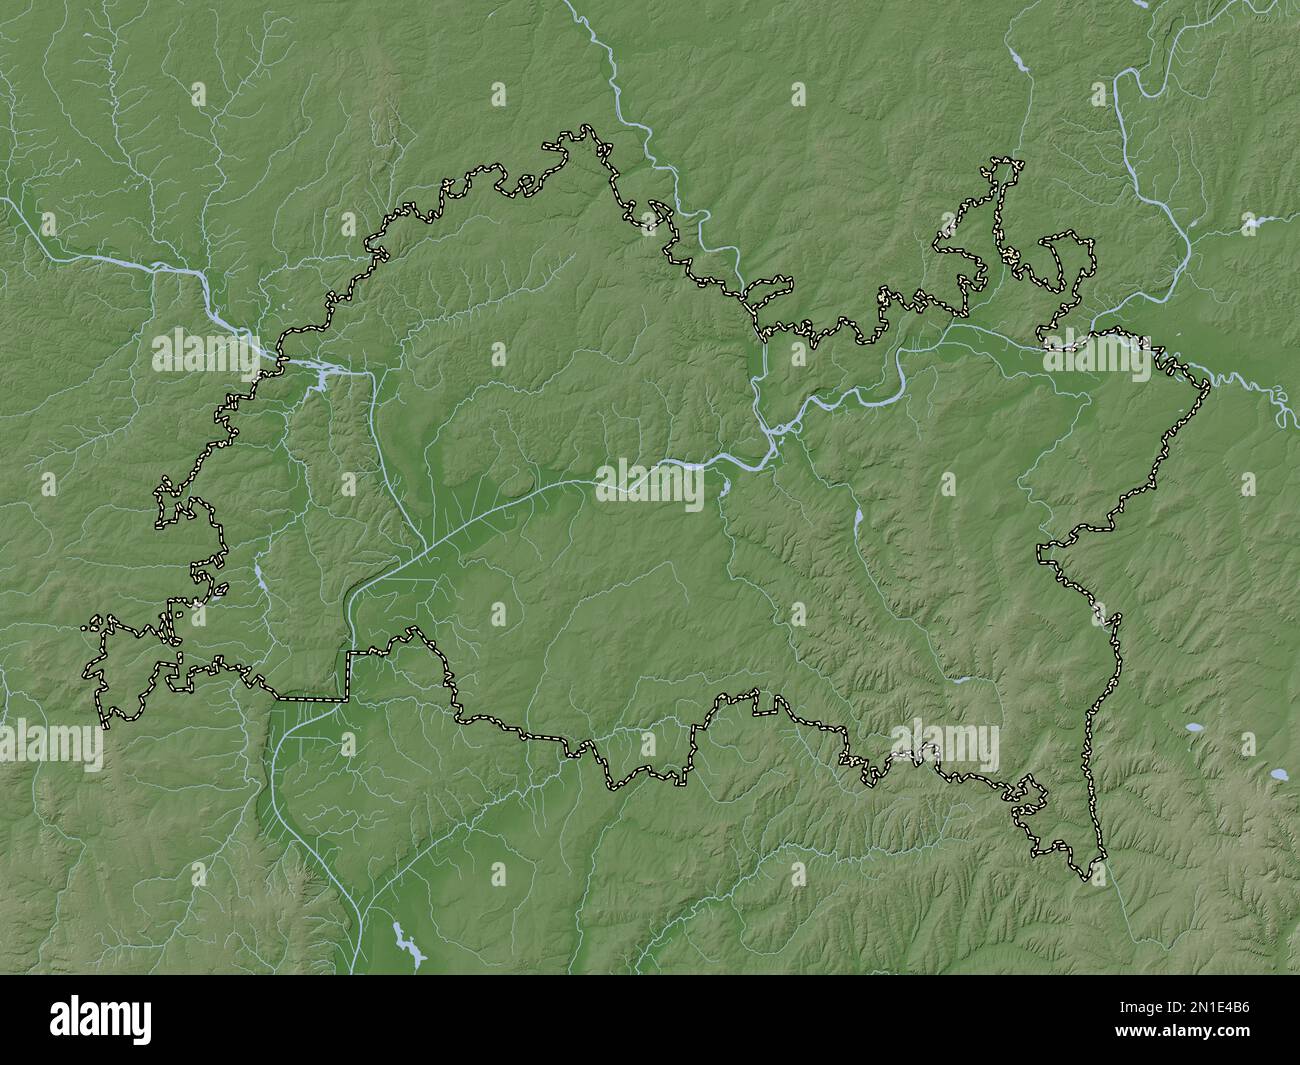 Tatarstan, republic of Russia. Elevation map colored in wiki style with lakes and rivers Stock Photo